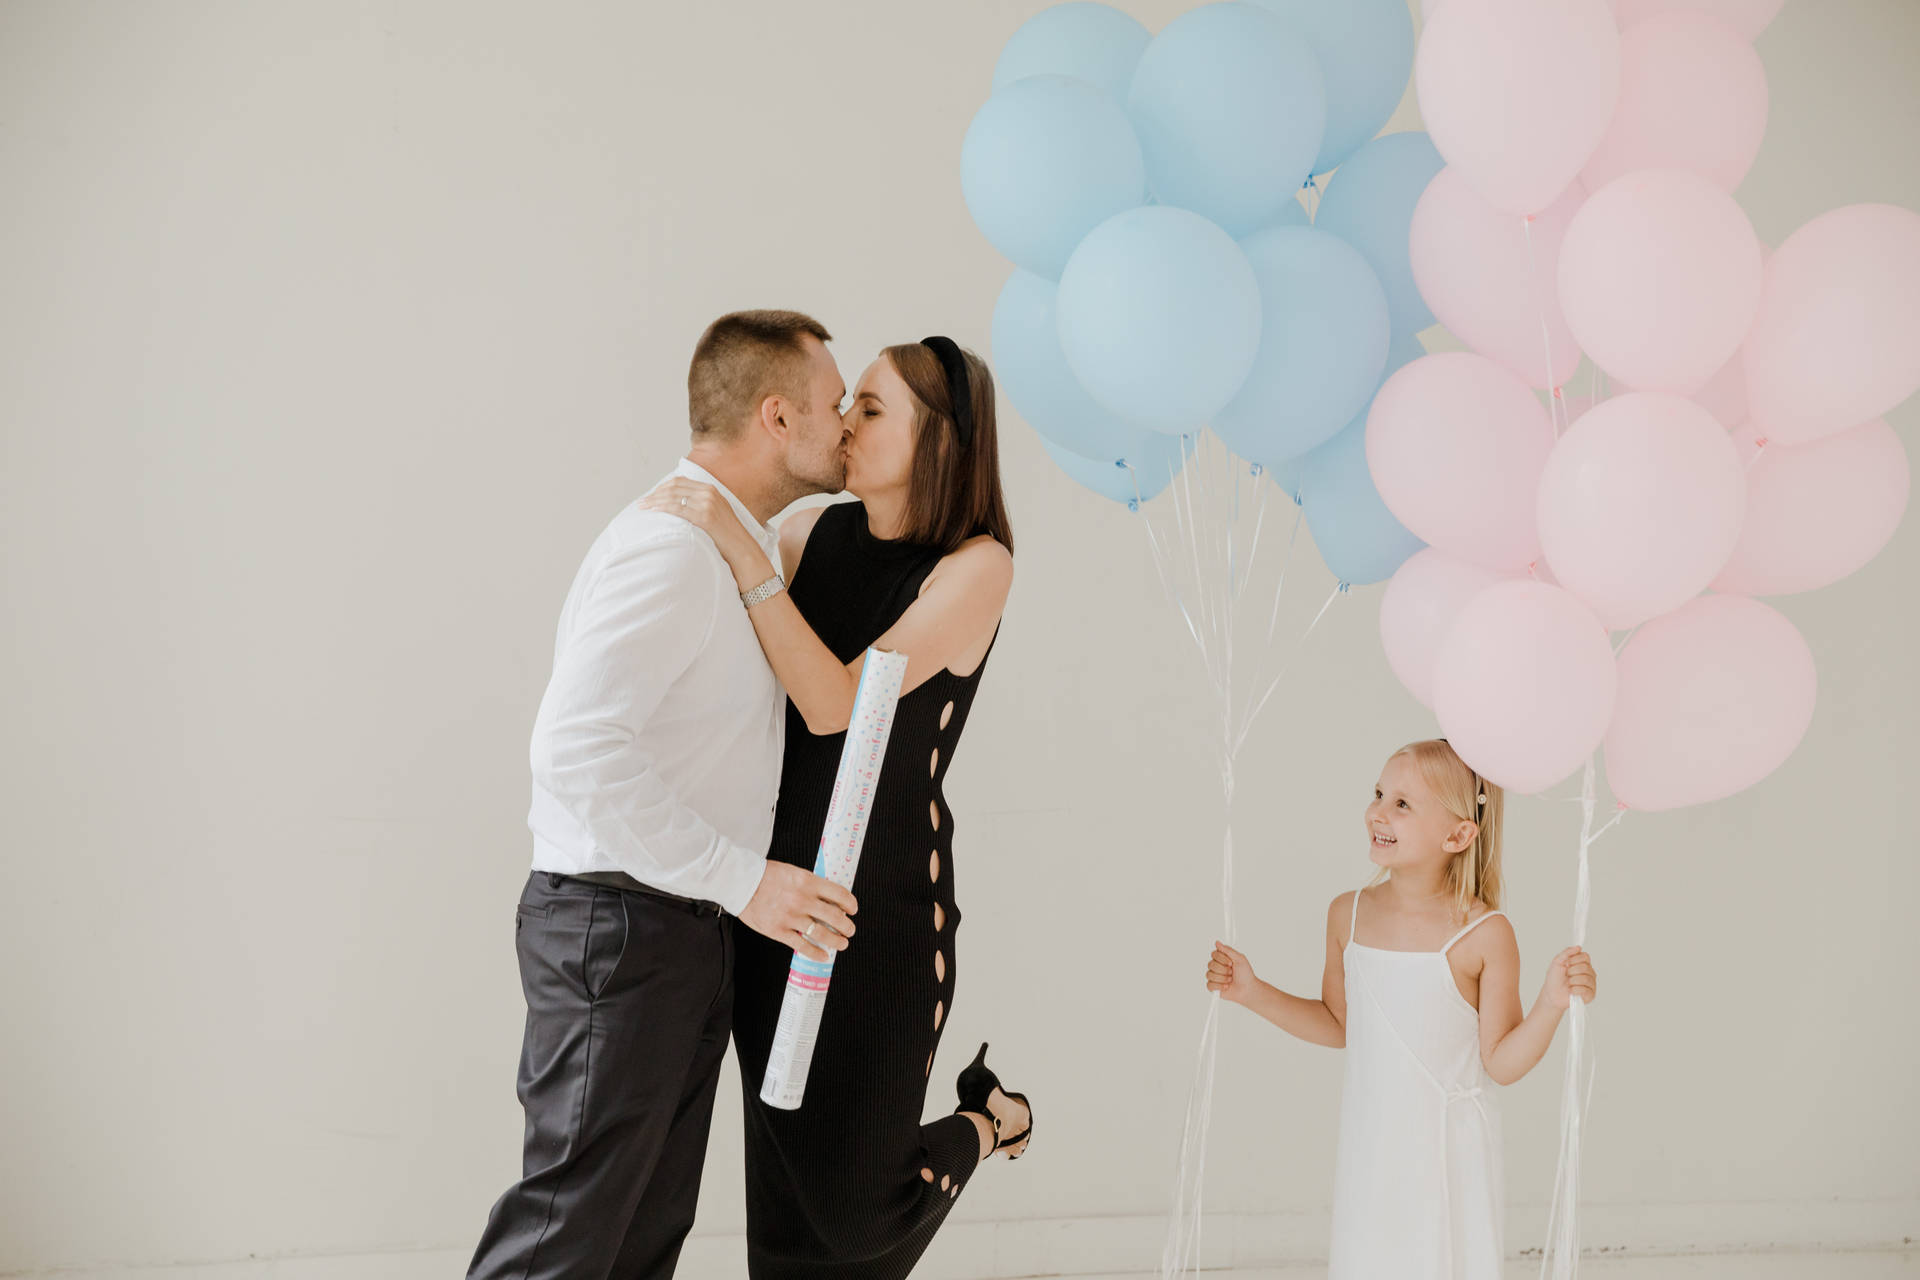 Family Photoshoot With Balloons Wallpaper